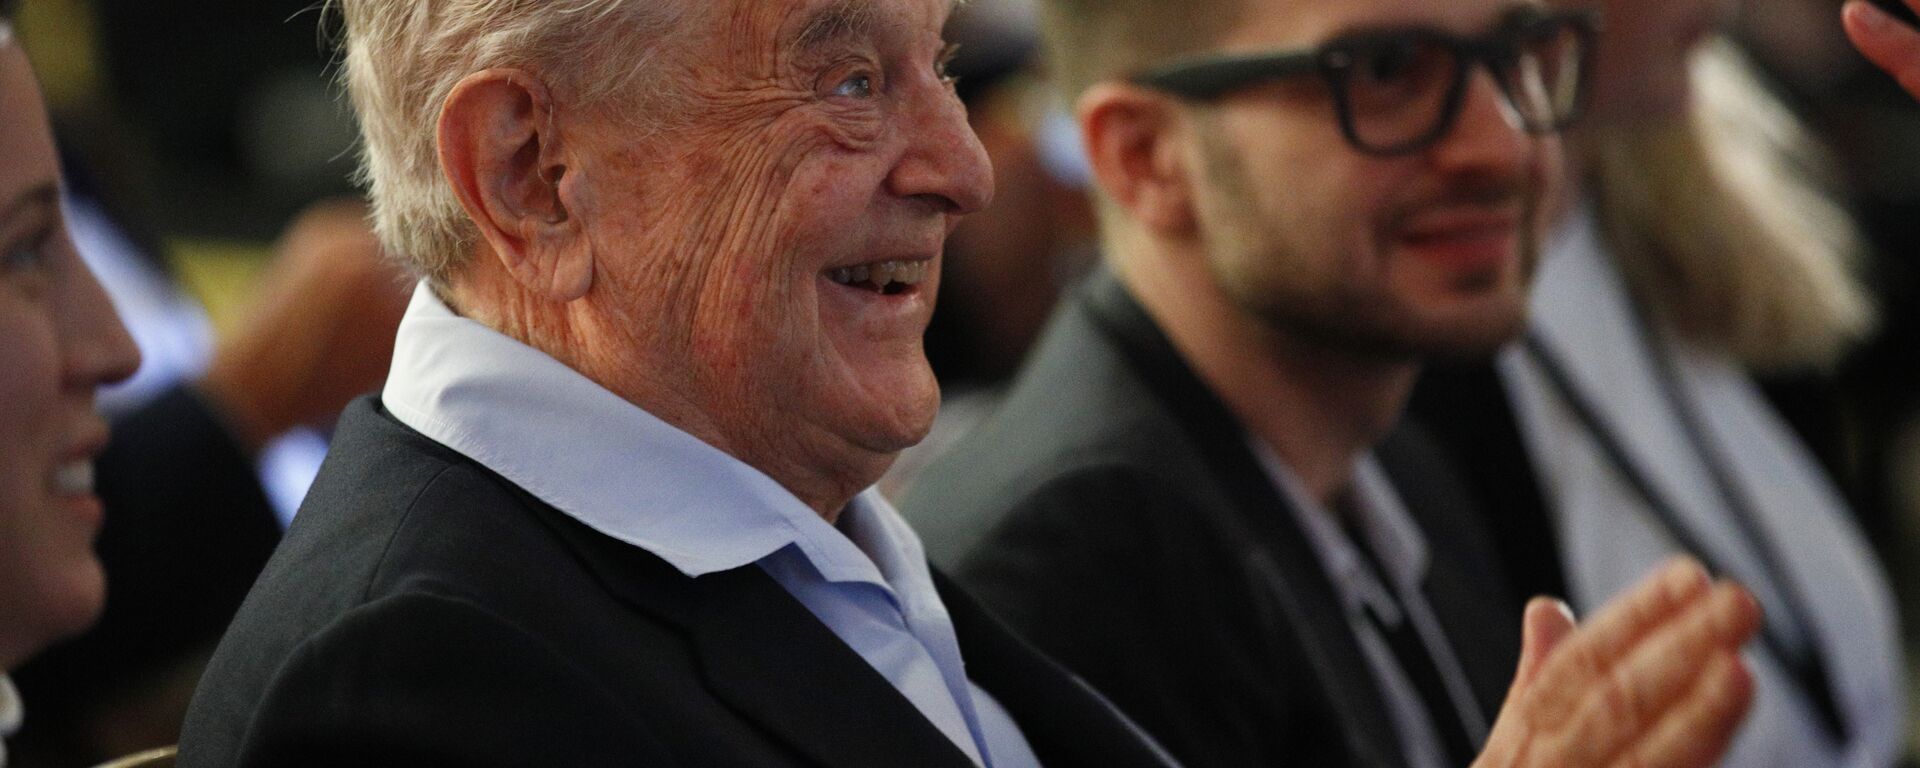 George Soros, founder and chairman of the Open Society Foundations attends the European Council On Foreign Relations Annual Council Meeting in Paris, Tuesday, 29 May 2018. - Sputnik International, 1920, 21.05.2021